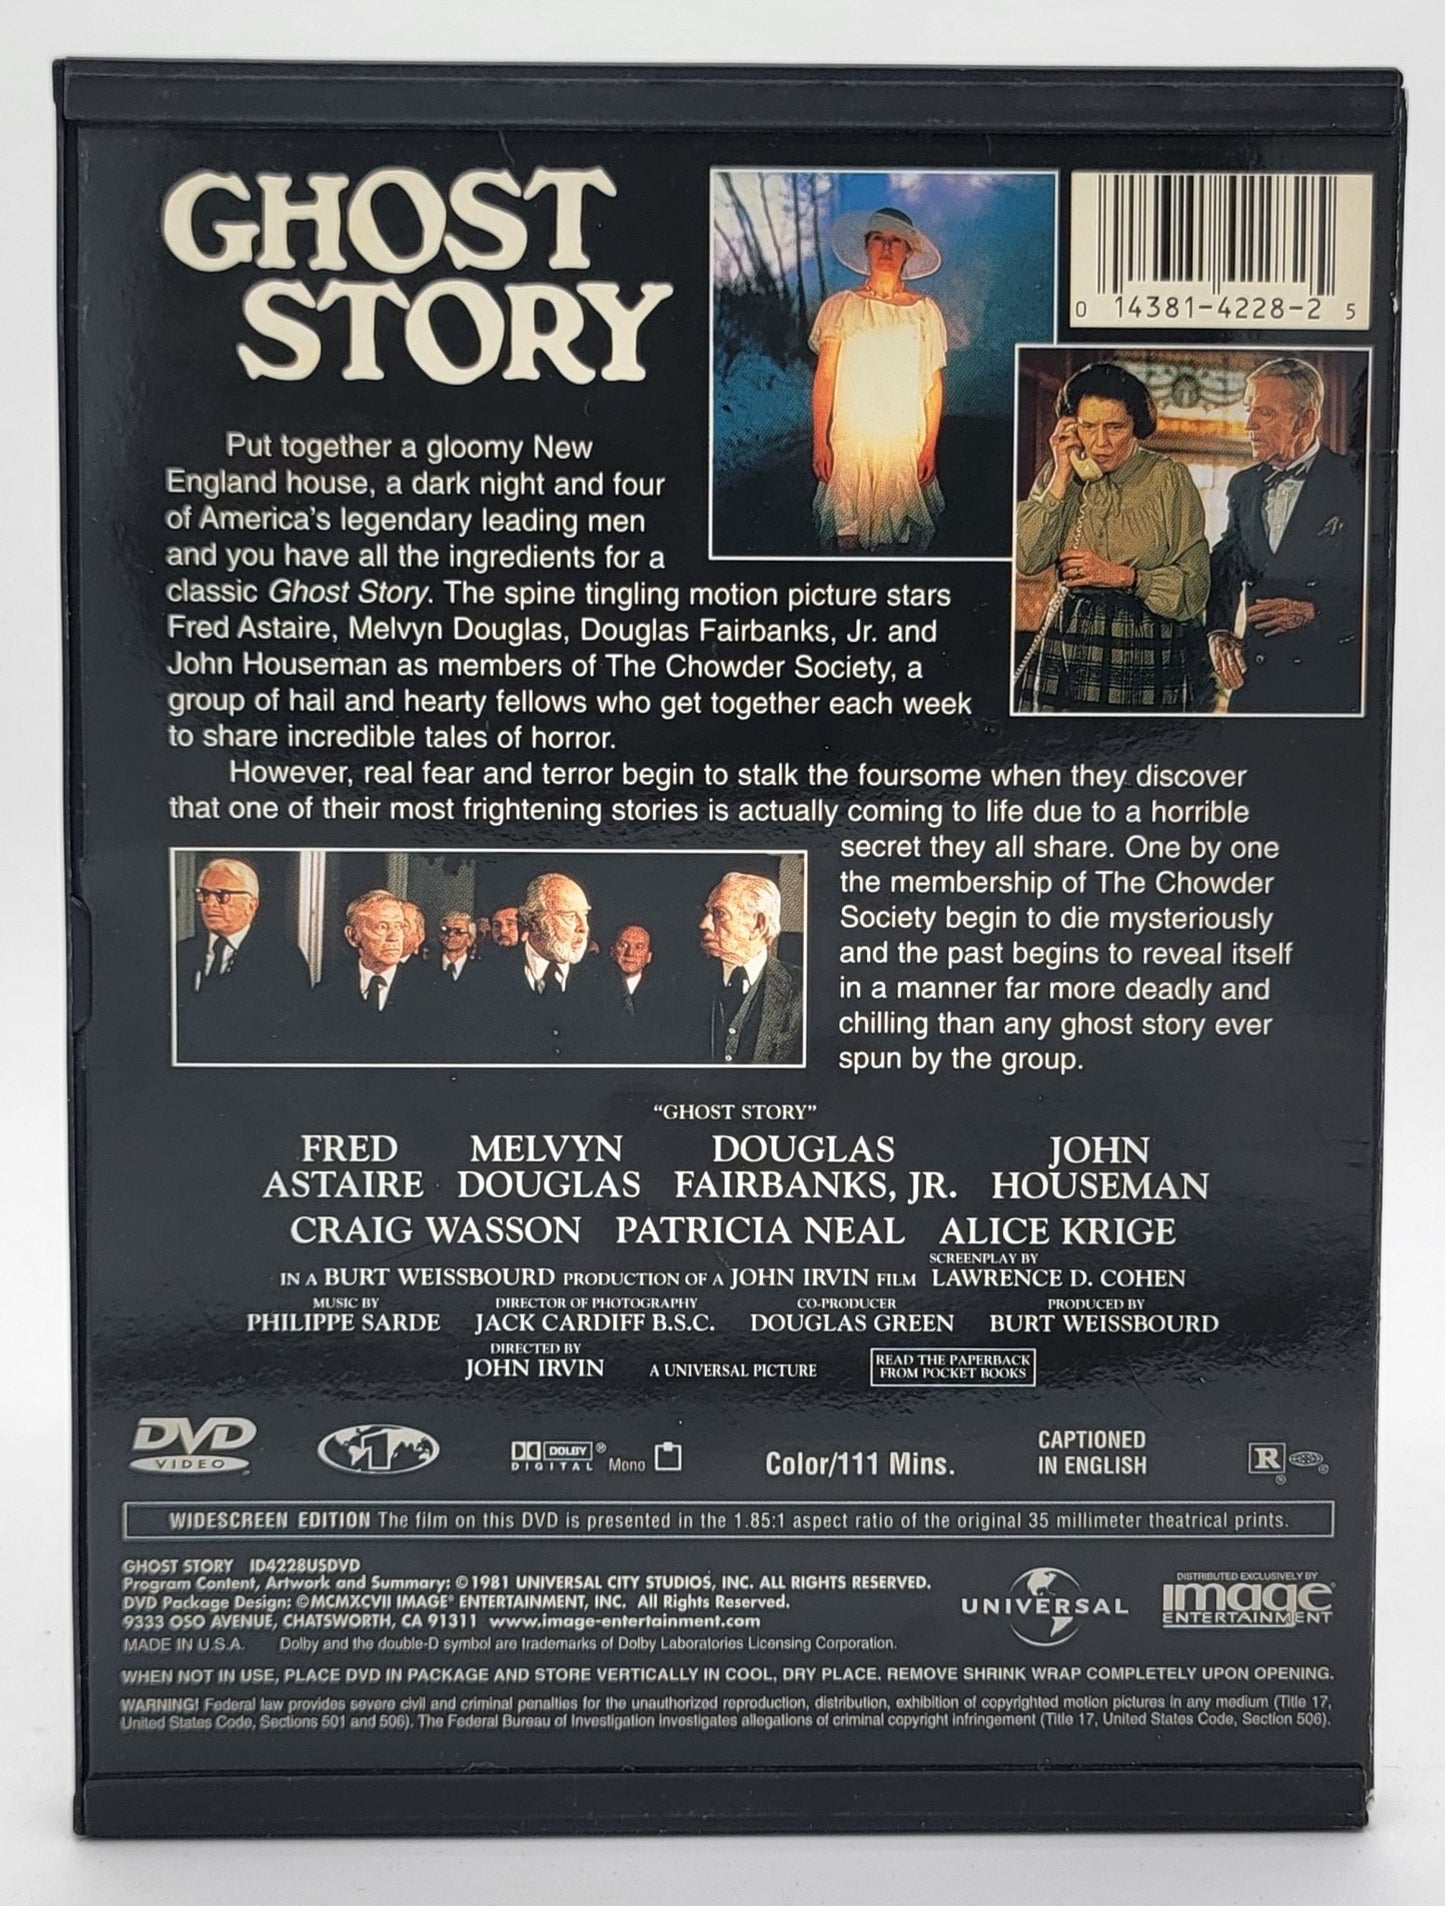 Universal Studios Home Entertainment - Ghost Story 1981 | DVD | Widescreen - DVD - Steady Bunny Shop